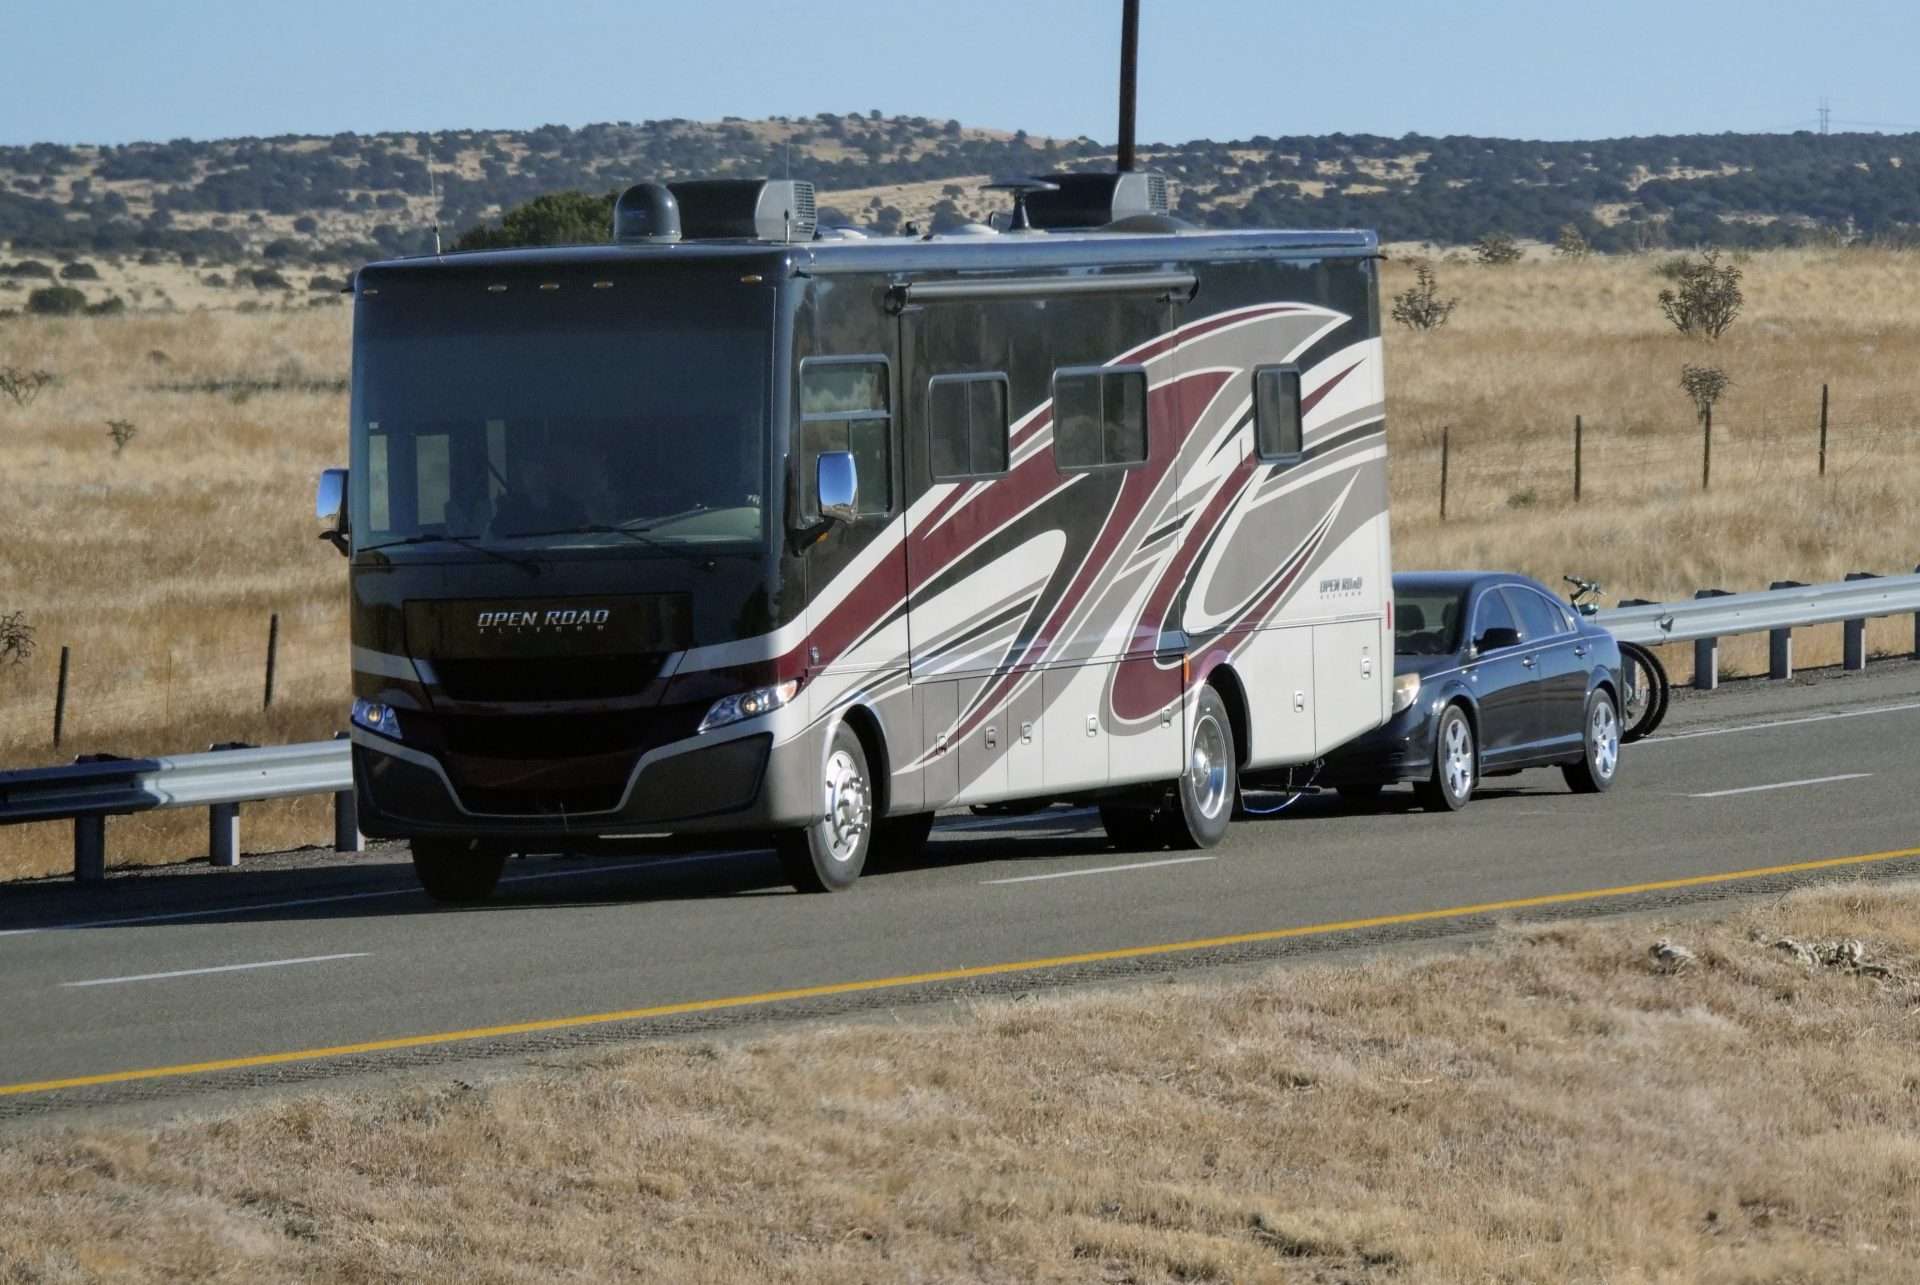 Motorhome and RV toad